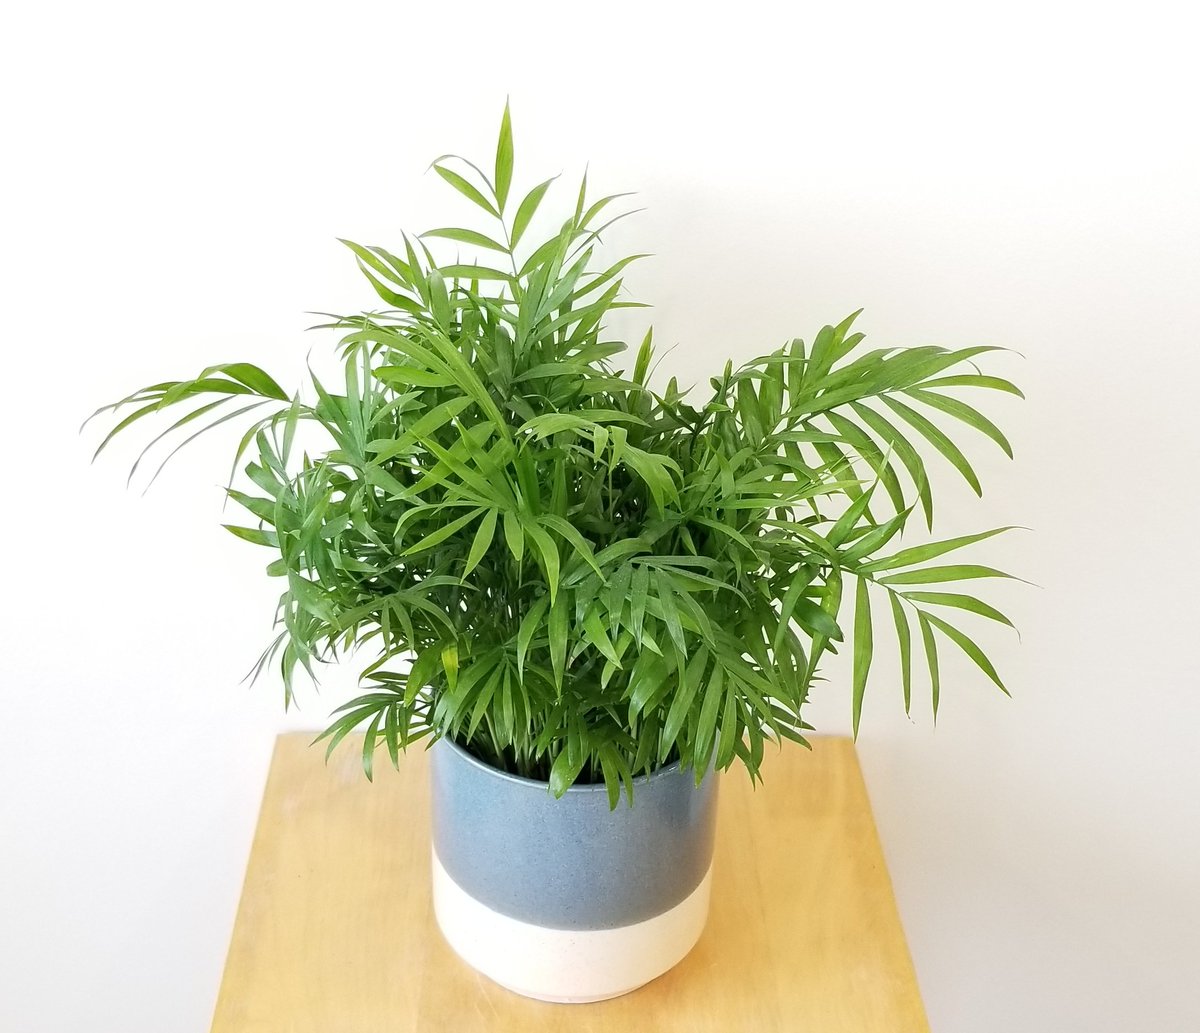 Beautiful #airpurifying #indoorplants available at @_InteriorPlants for #GTA delivery or in-store pickup in #mississauga or #etobicoke 💚🌿 On this photo: Parlour Palm 😍🌴grow in bright indirect light 🌿very strong air purifying qualities! 💙💚